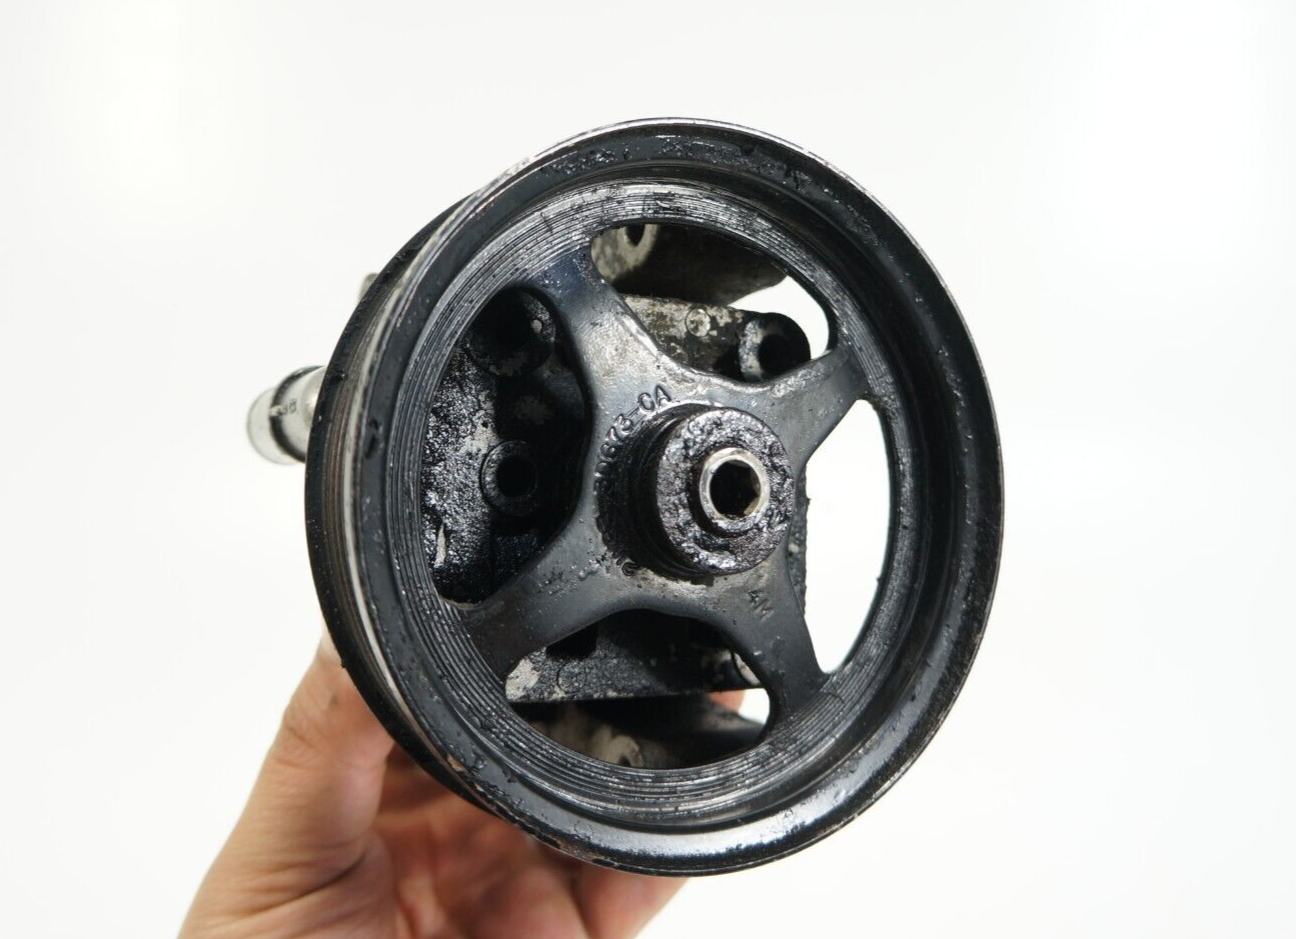 Primary image for 2009-2011 jaguar x250 xf 4.2L v8 power steering pump assembly 2W933A696 OEM